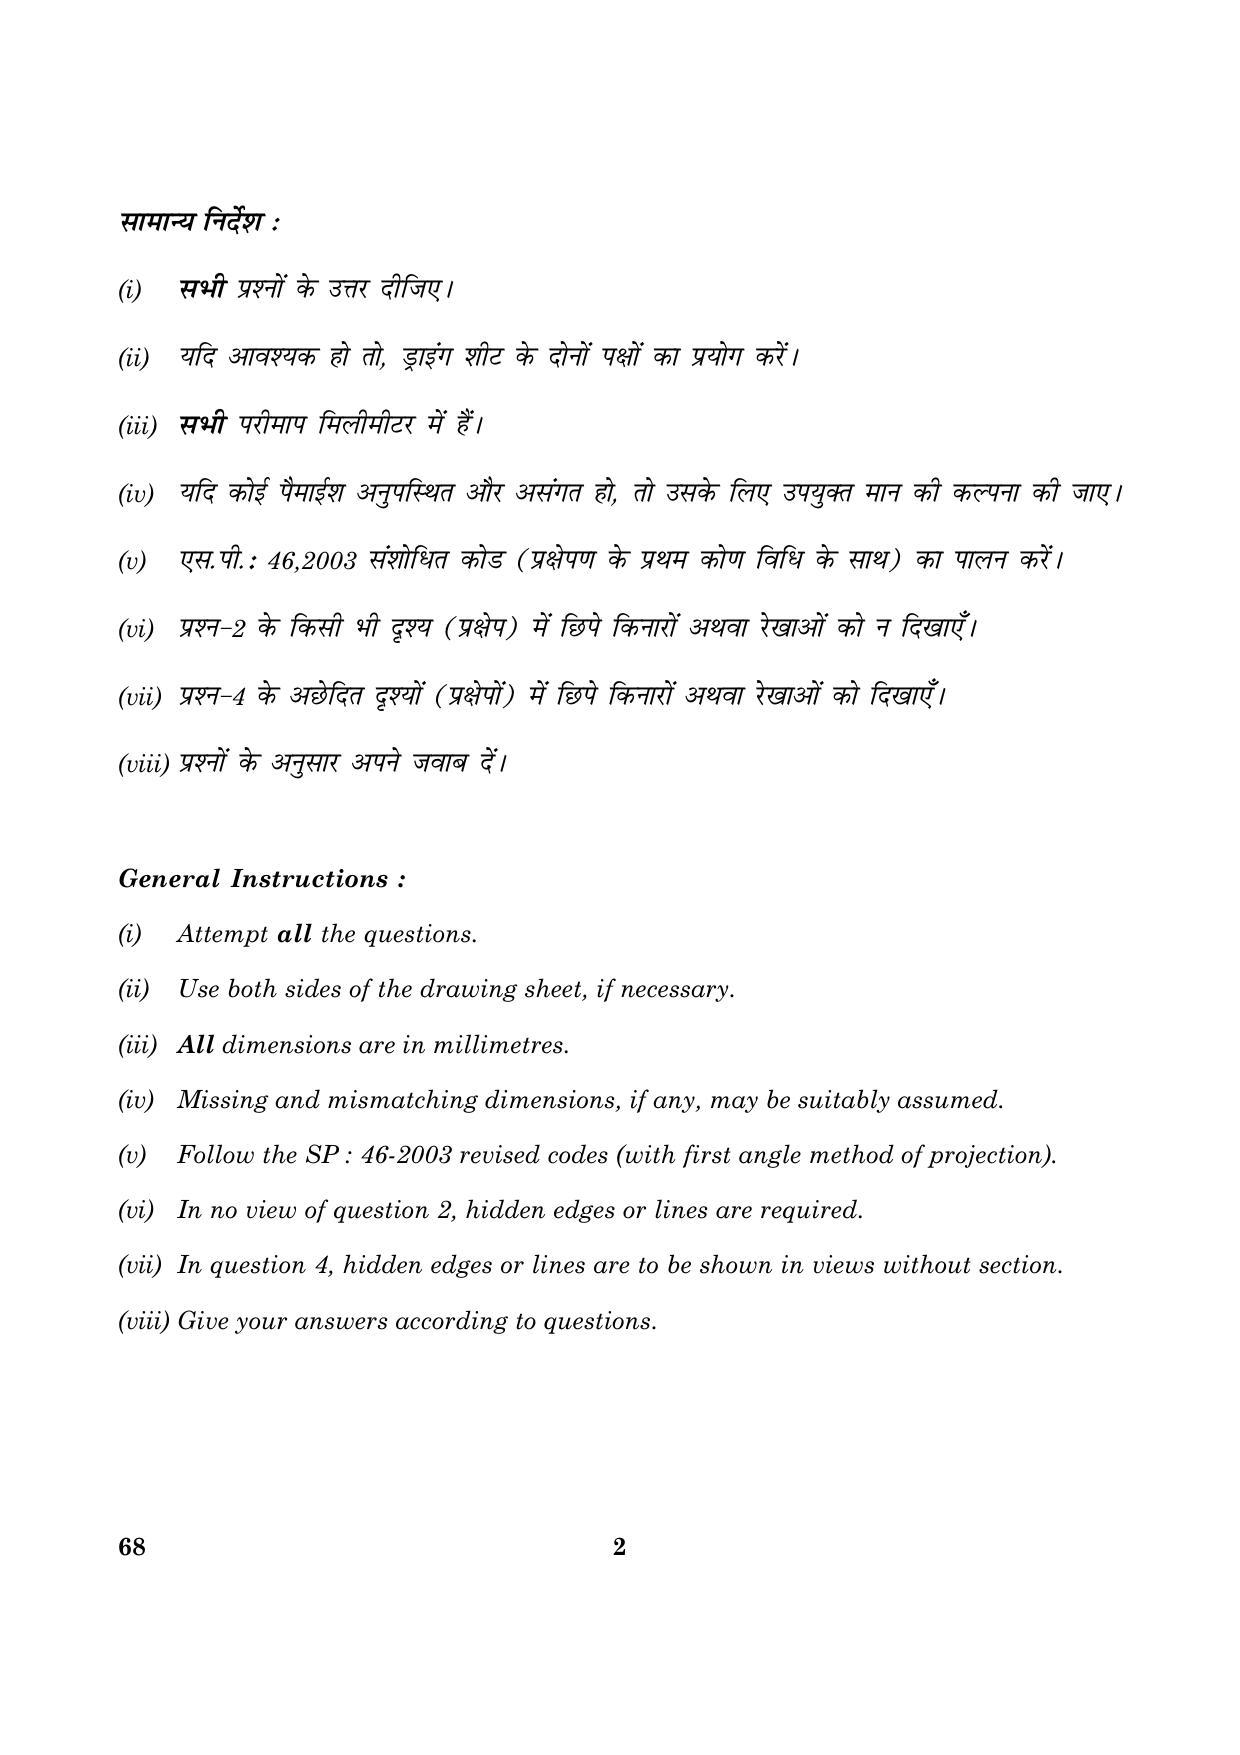 CBSE Class 12 068 Engineering Graphics 2016 Question Paper - Page 2